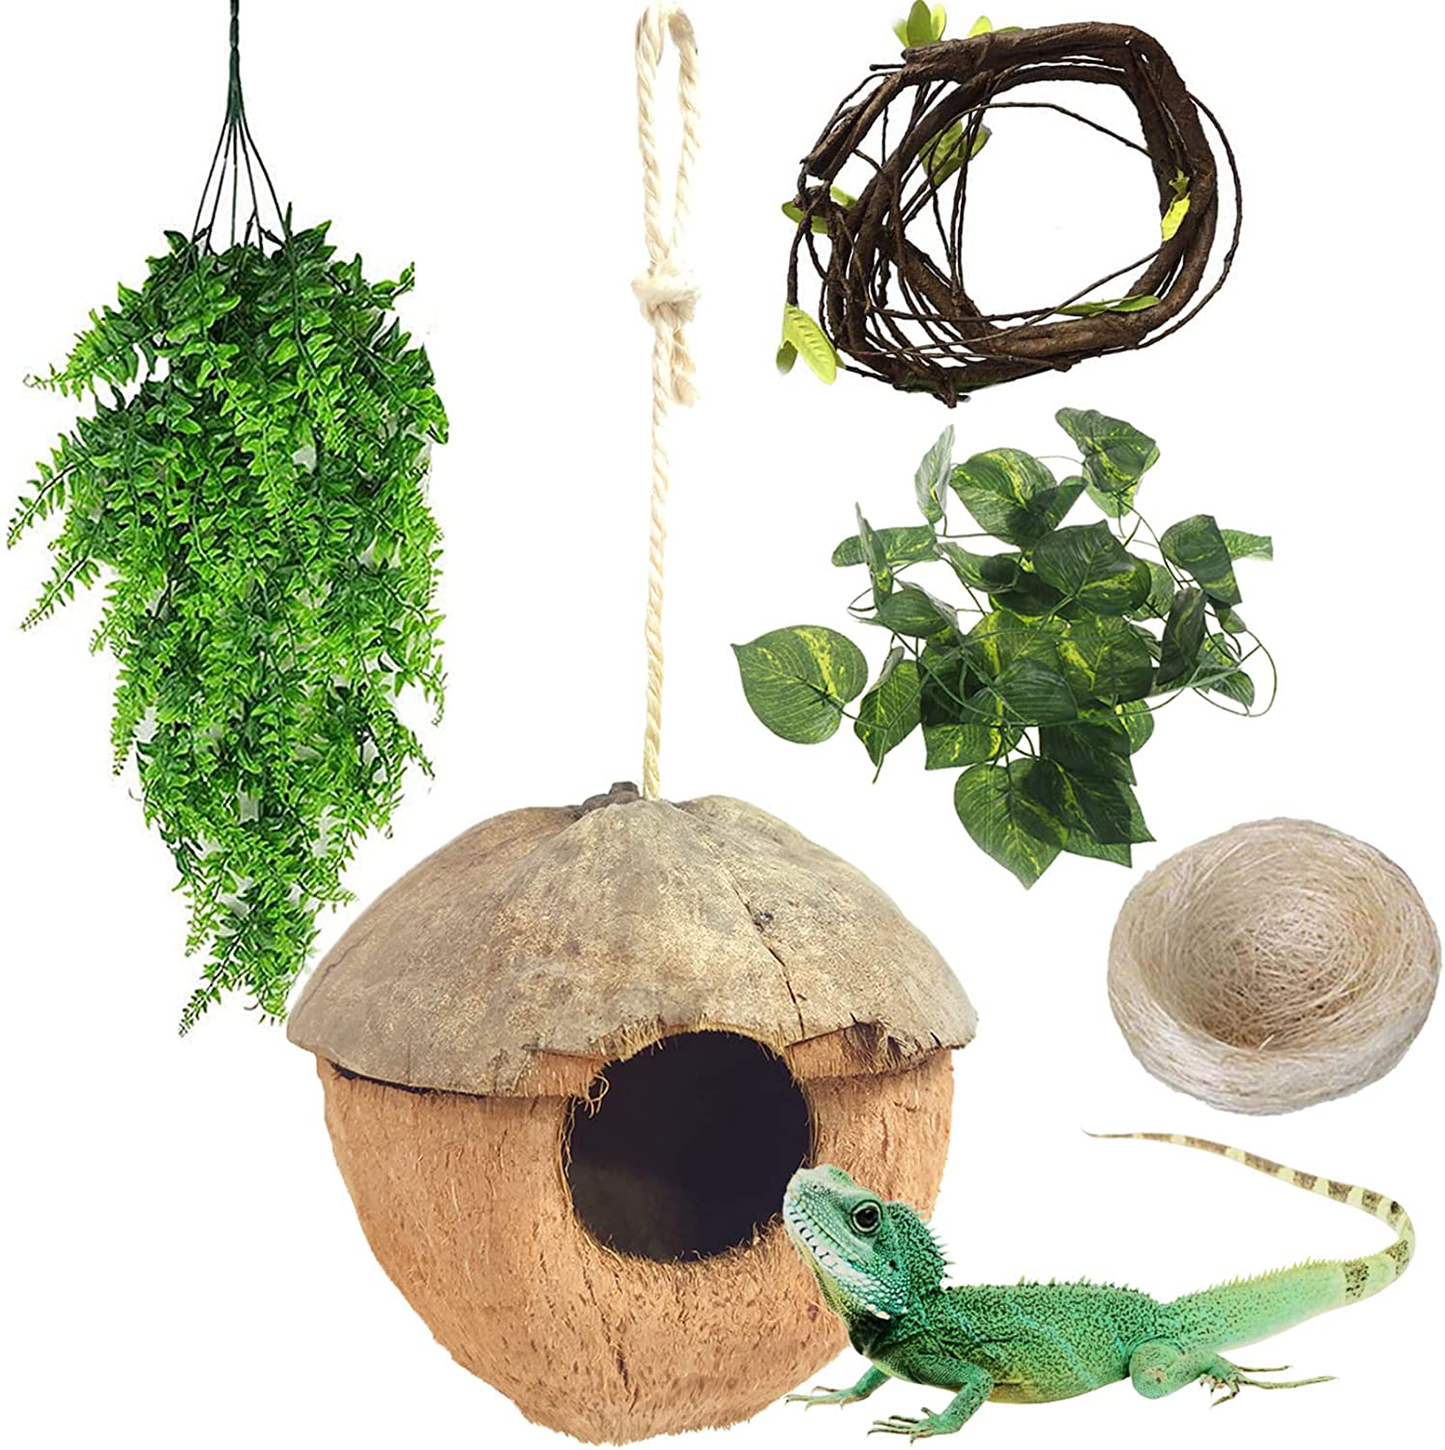 PINVNBY Reptile Coconut Hideout Lizard Coconut Hut Reptile Habitat Decoration with Artificial Bendable Vines Green Plants and Leaves Gecko Tank Accessories for Chameleon Bearded Dragons Snakes Animals & Pet Supplies > Pet Supplies > Reptile & Amphibian Supplies > Reptile & Amphibian Habitats PINVNBY   